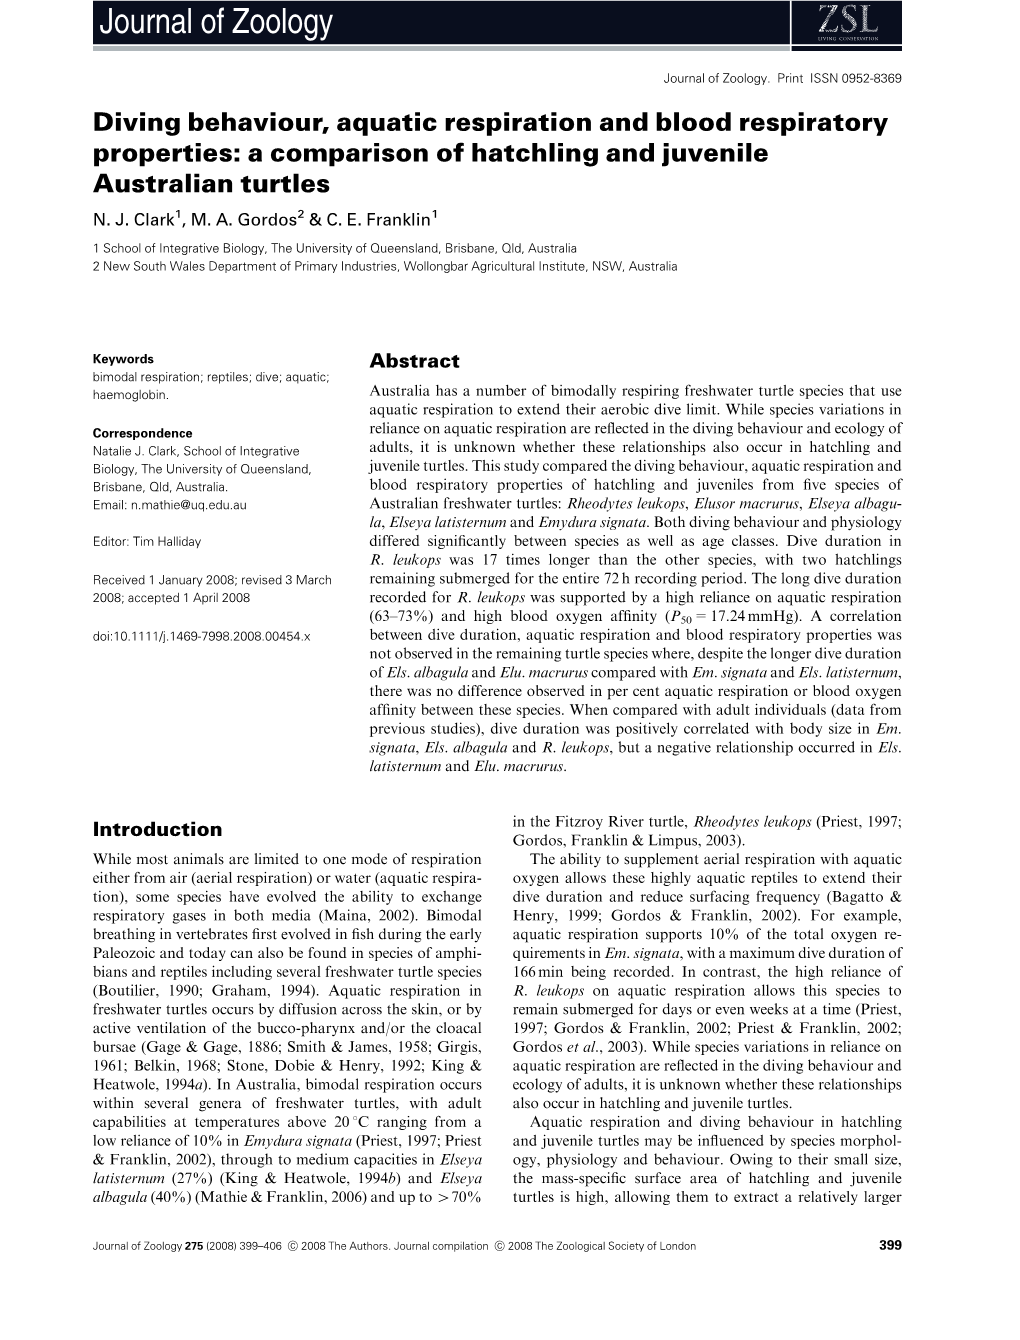 Diving Behaviour, Aquatic Respiration and Blood Respiratory Properties: a Comparison of Hatchling and Juvenile Australian Turtles N